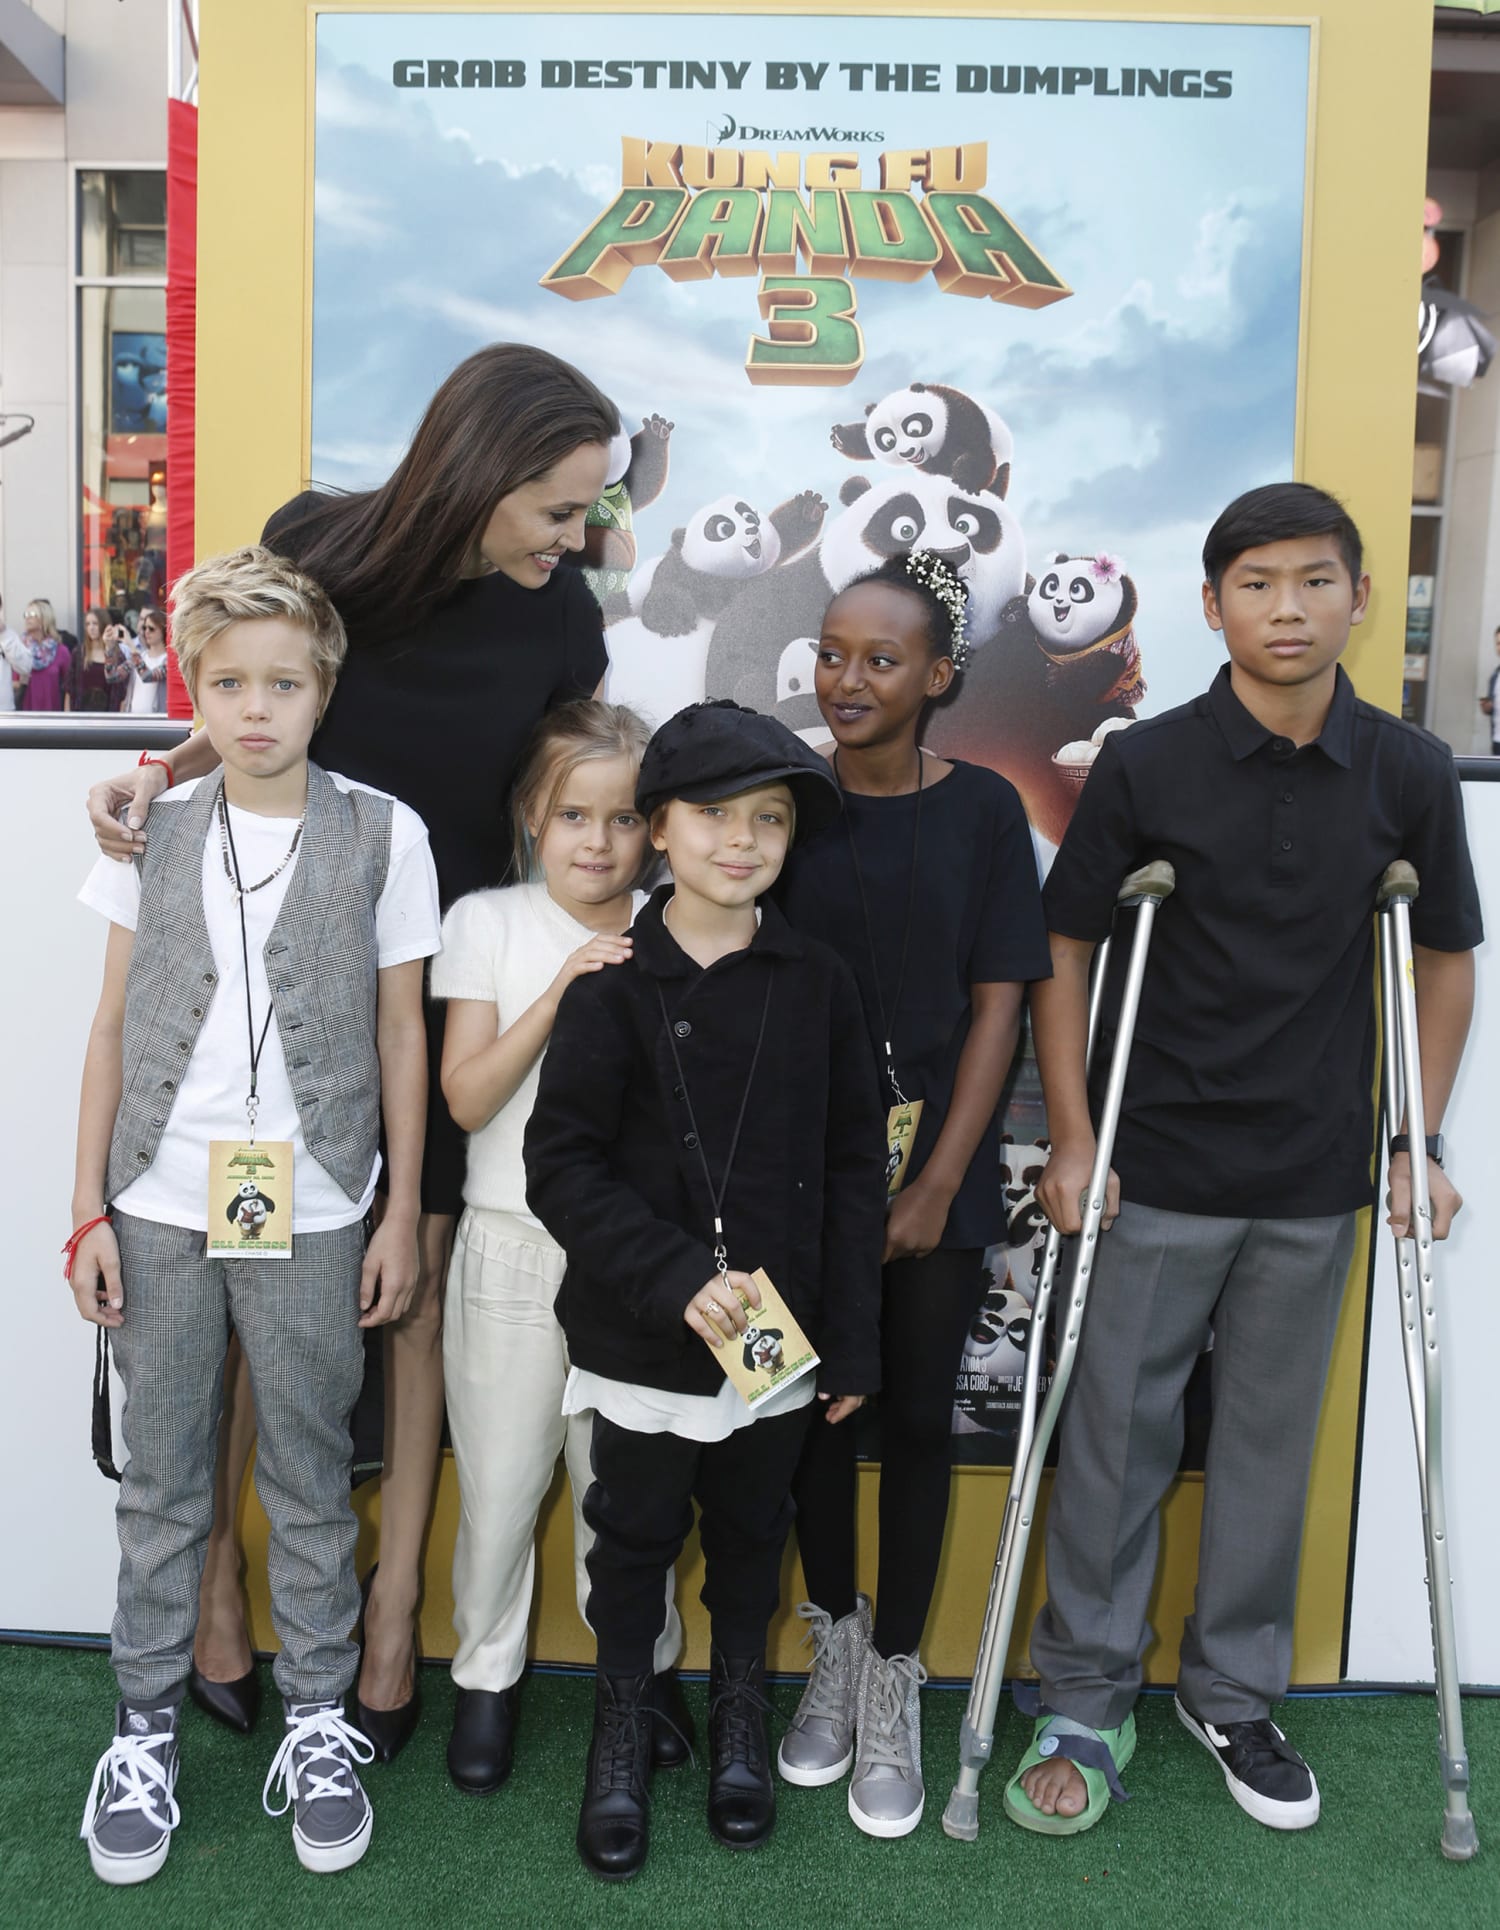 Angelina Jolie's early life caused her to believe she would 'never' be a  mom - Celebrity Tidbit